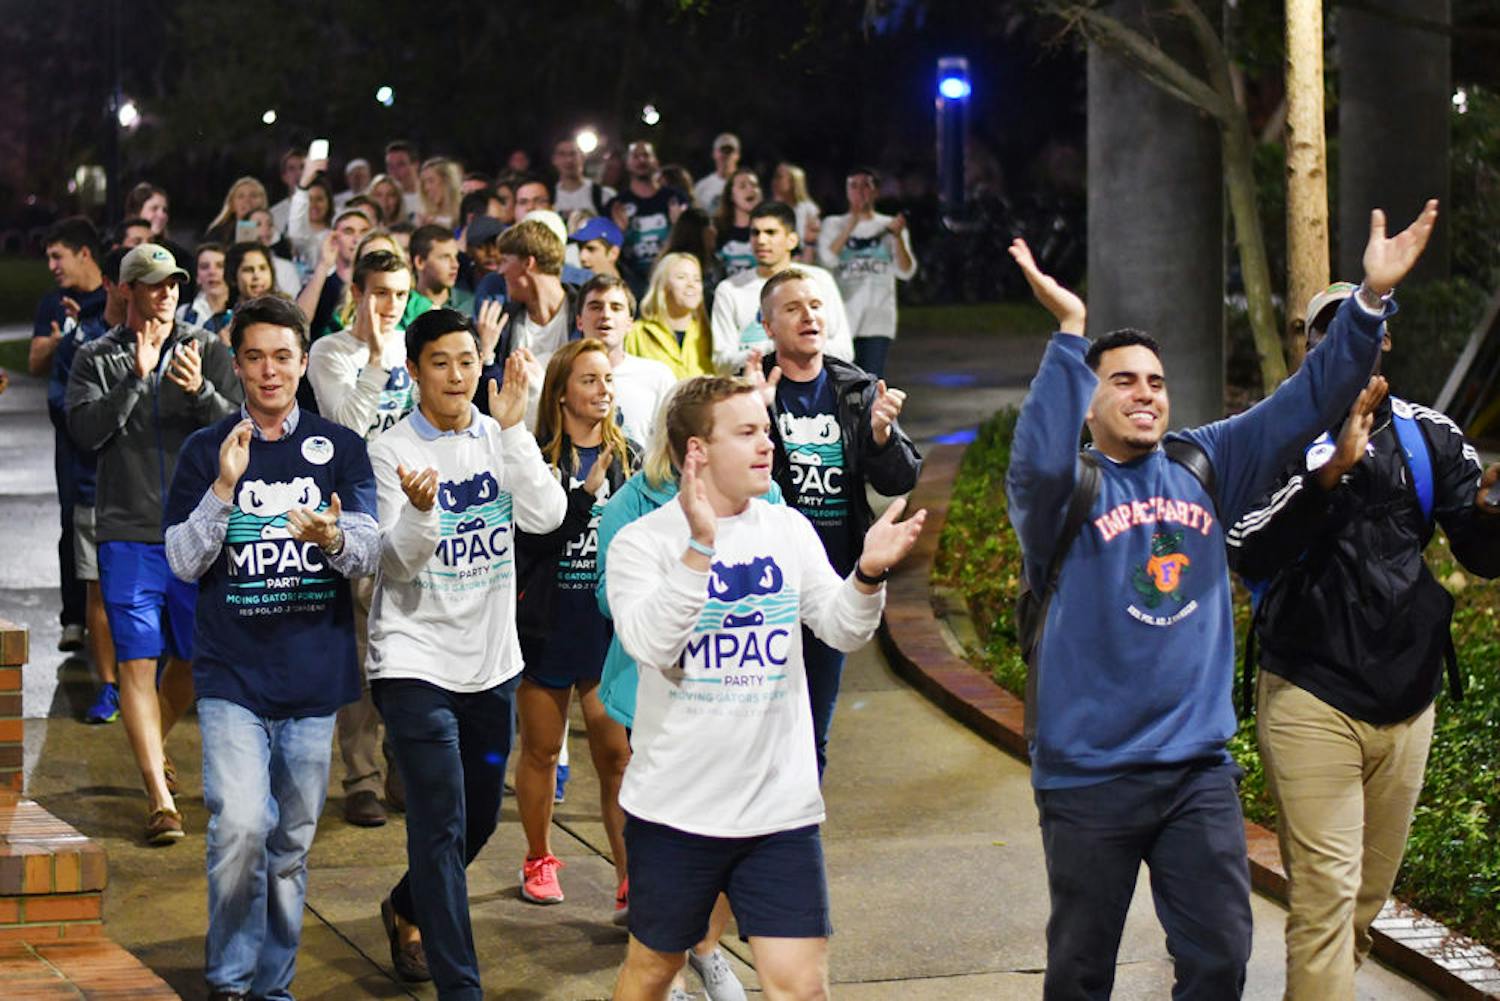 The Impact Party walks to the Reitz Union Breezeway on Feb. 22, 2017, chanting “I-M-P-A-C-T. Impact is for you and me.” The Impact Party won 48 seats in the Spring 2017 election.